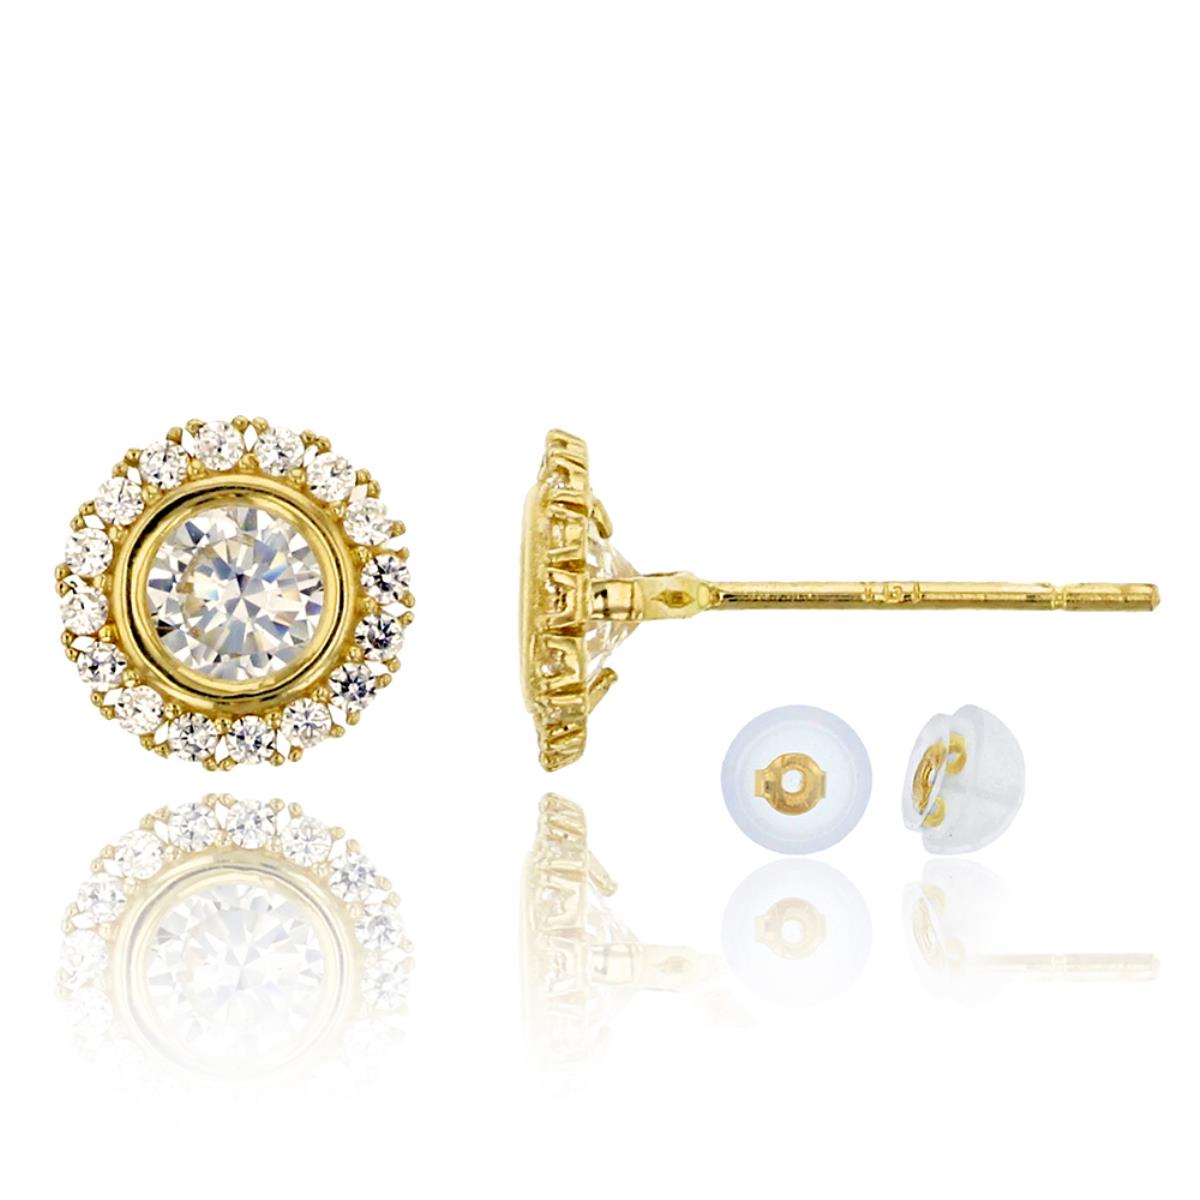 10K Yellow Gold Micropave 4mm Round CZ Bezel Stud Earring & 10K Silicone Back